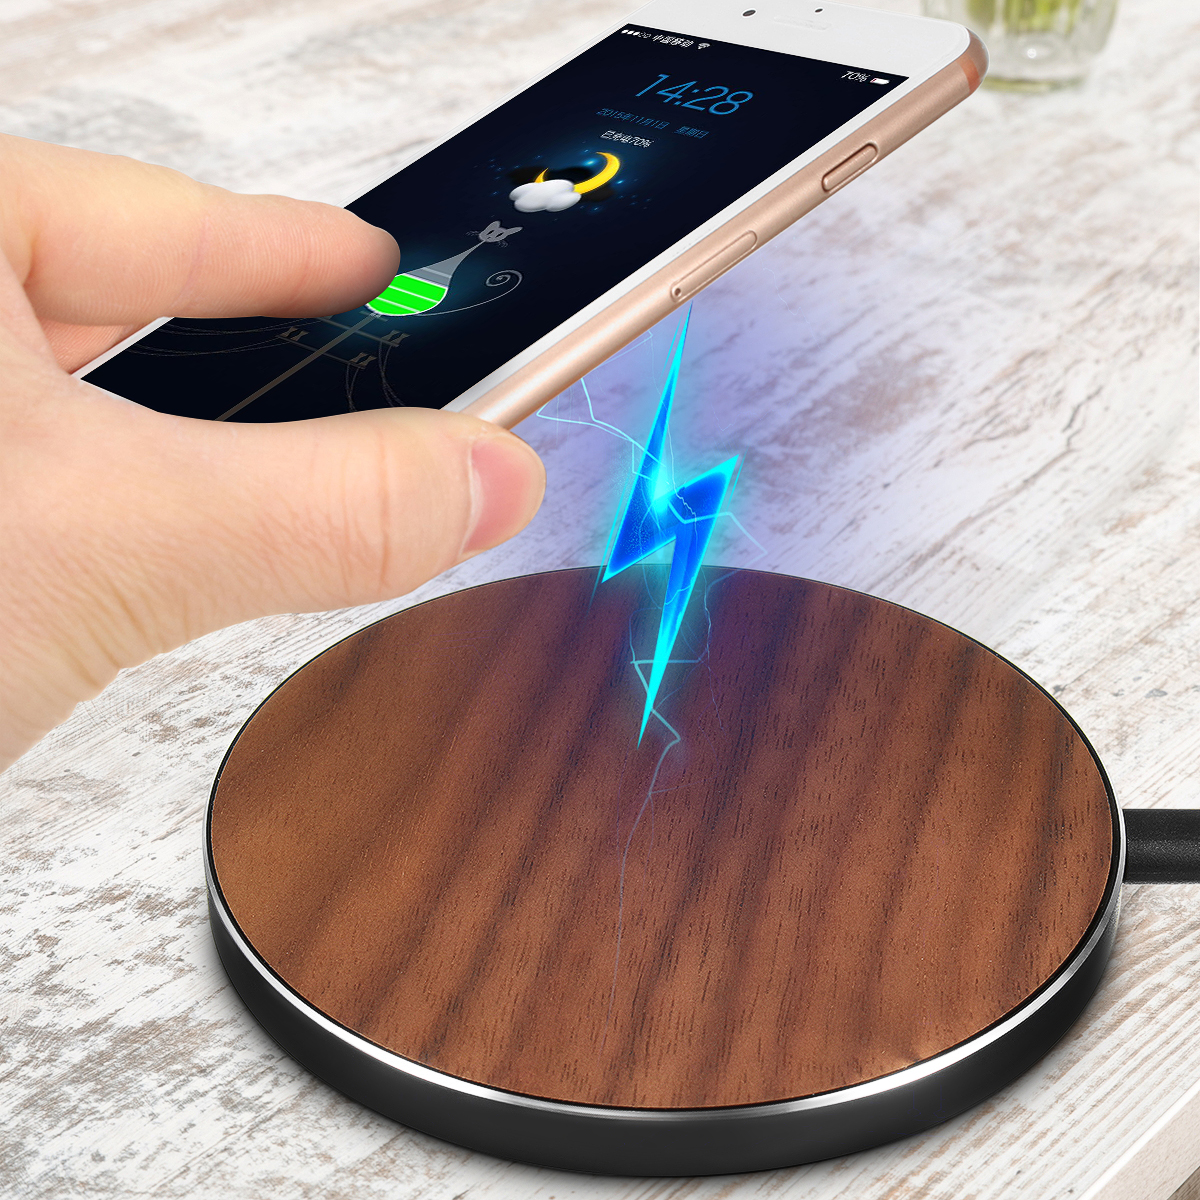 10W Qi Wireless Metal Wooden LED Fast Desktop Charger Pad for iPhone X 8 Plus S8 S9 Note 8